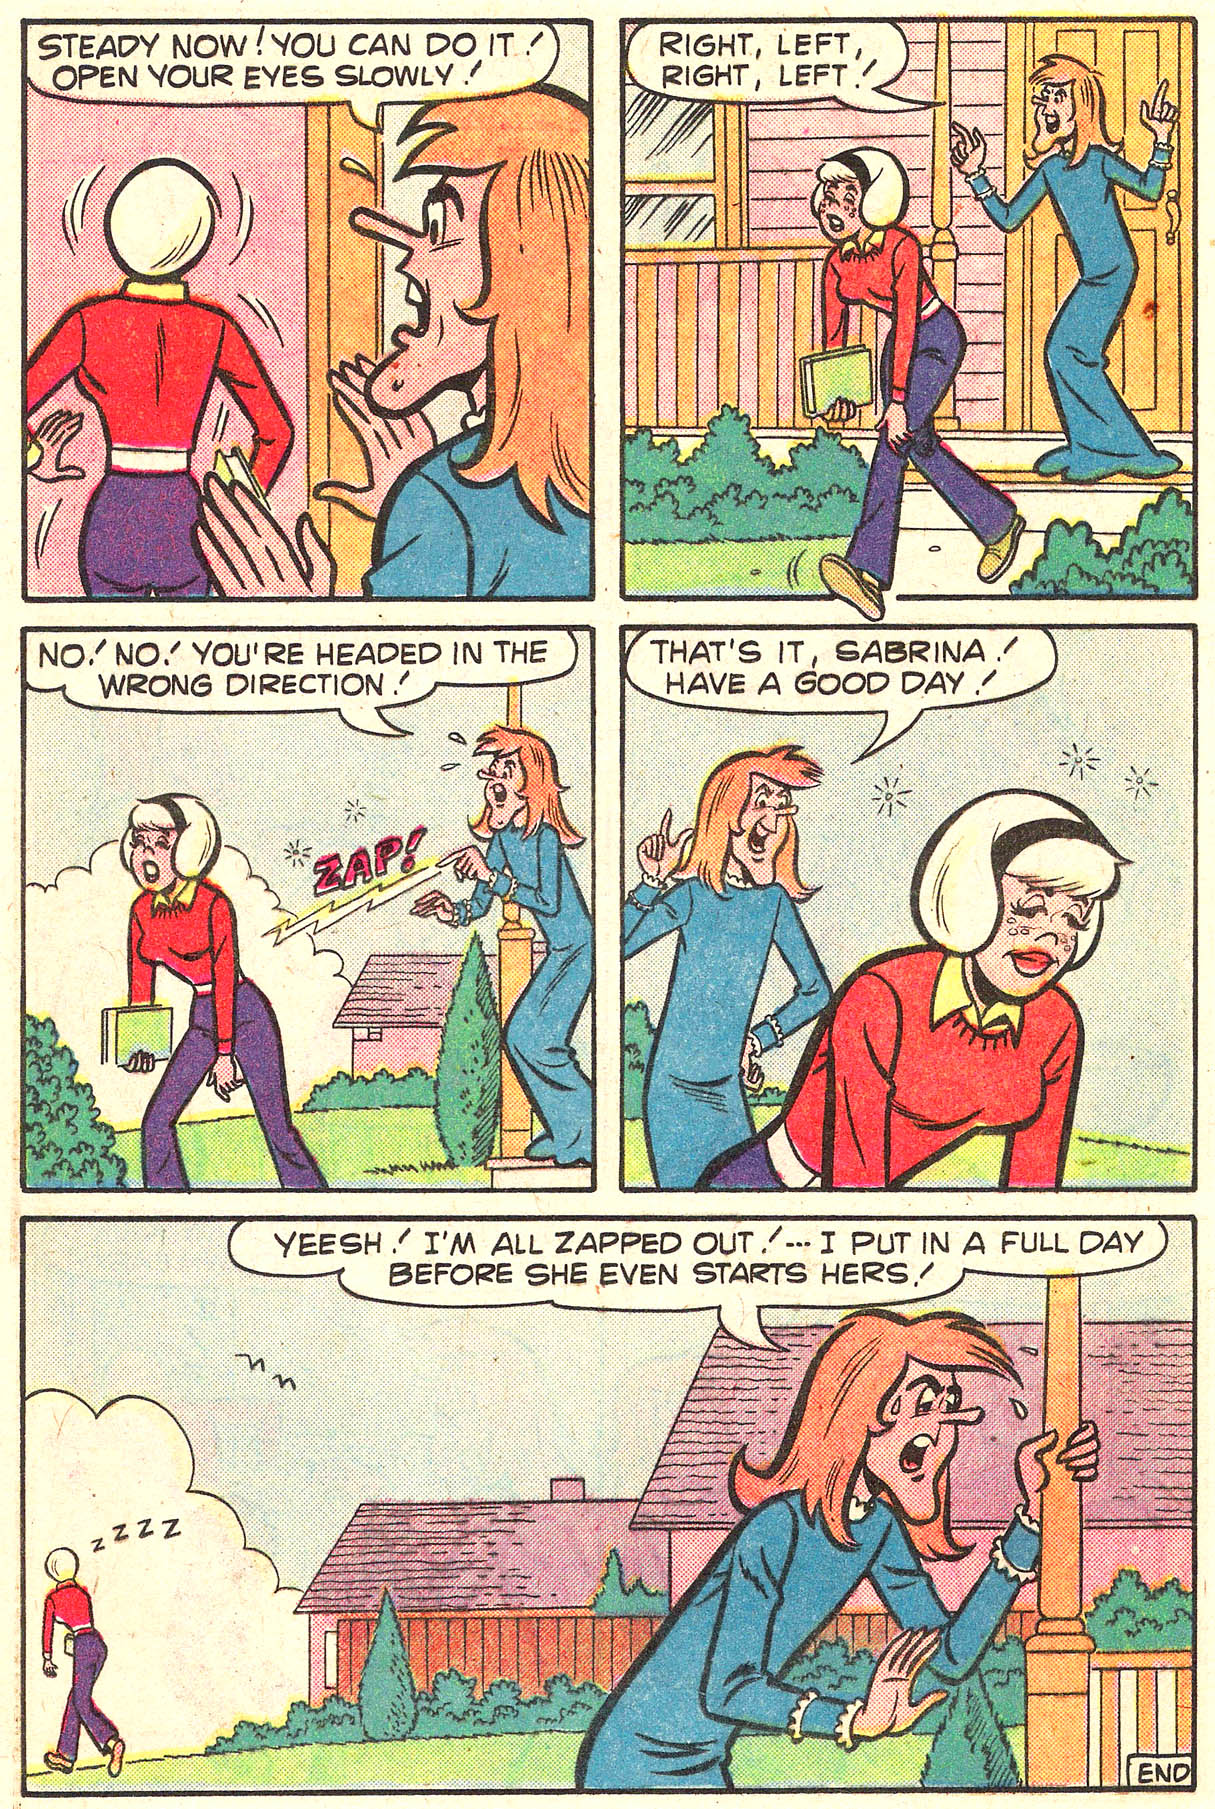 Sabrina The Teenage Witch (1971) Issue #50 #50 - English 24